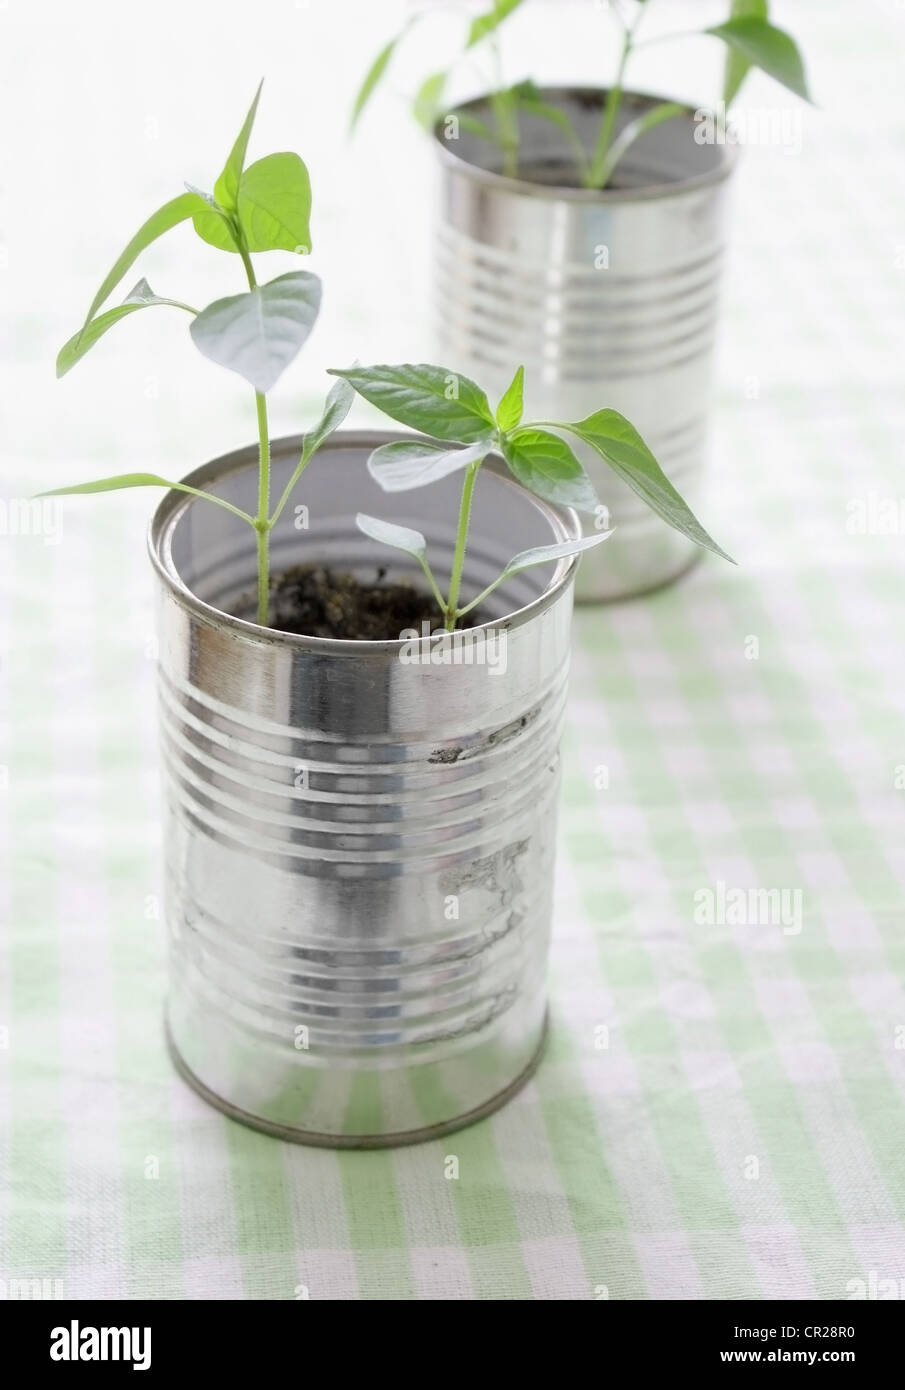 A small plant in a tin can Stock Photo